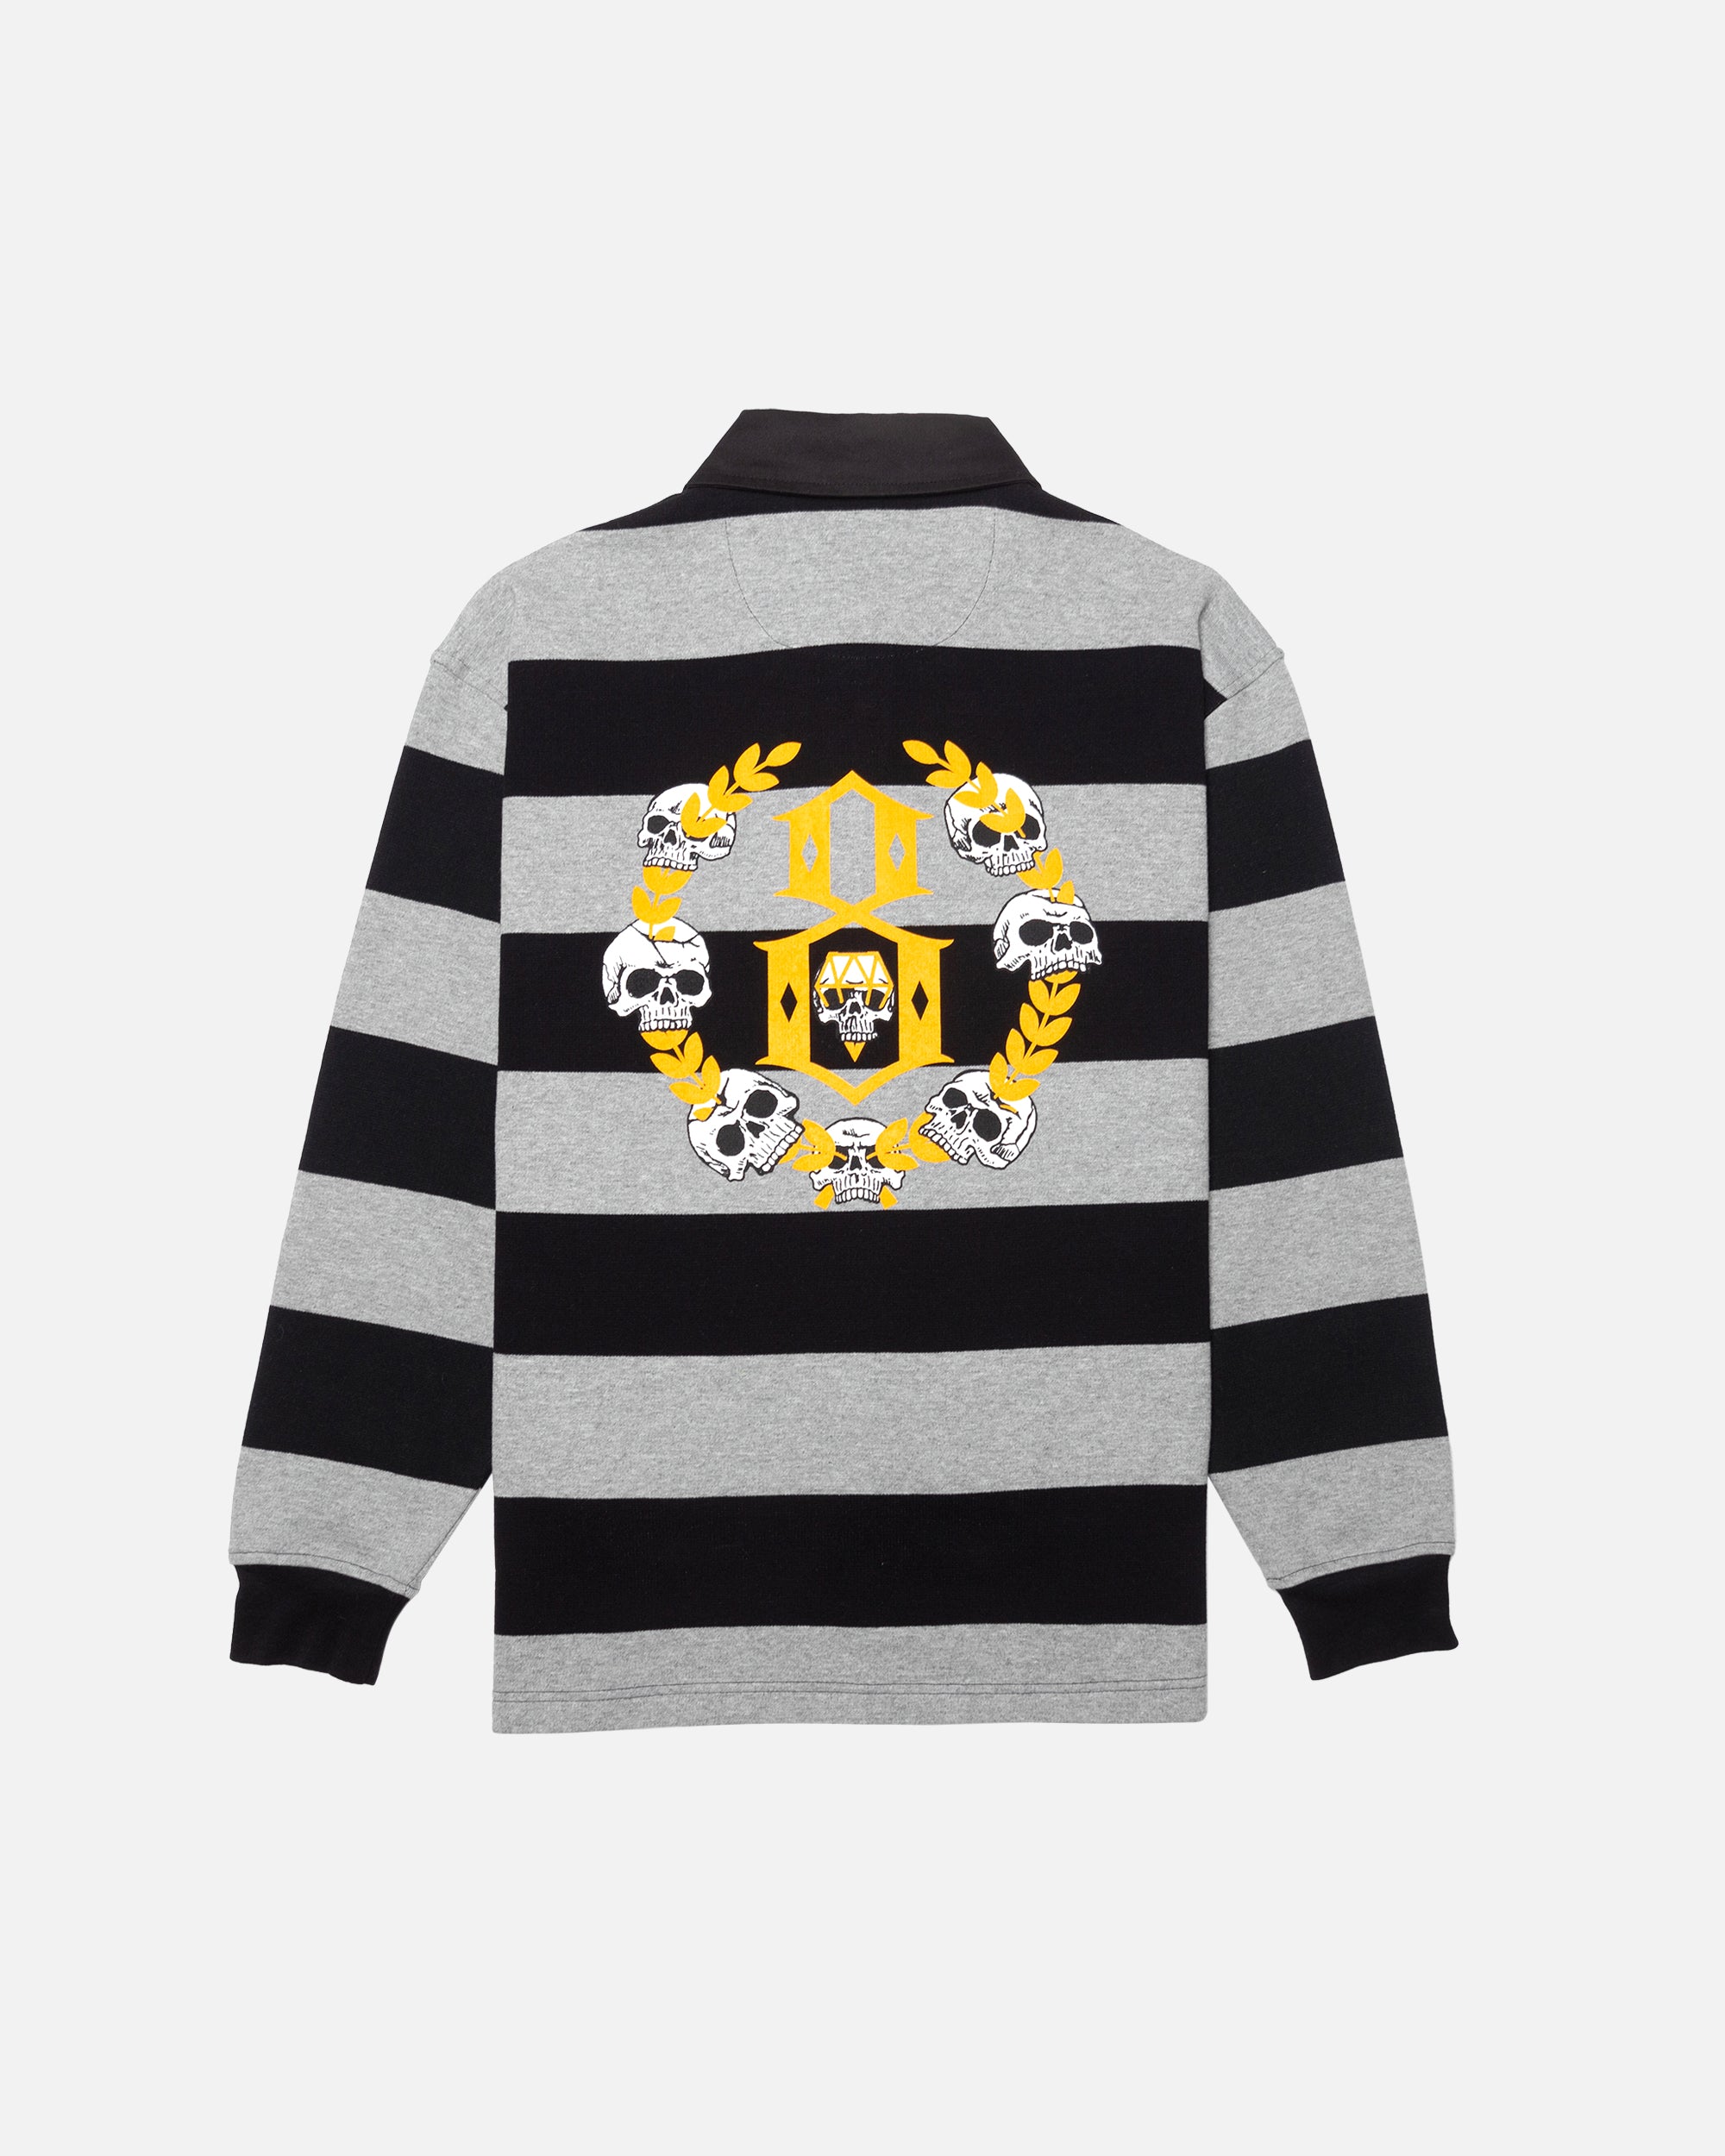 Rugby shirt with black and grey horizontal stripes and skulls with laurels screen printed in yellow on back